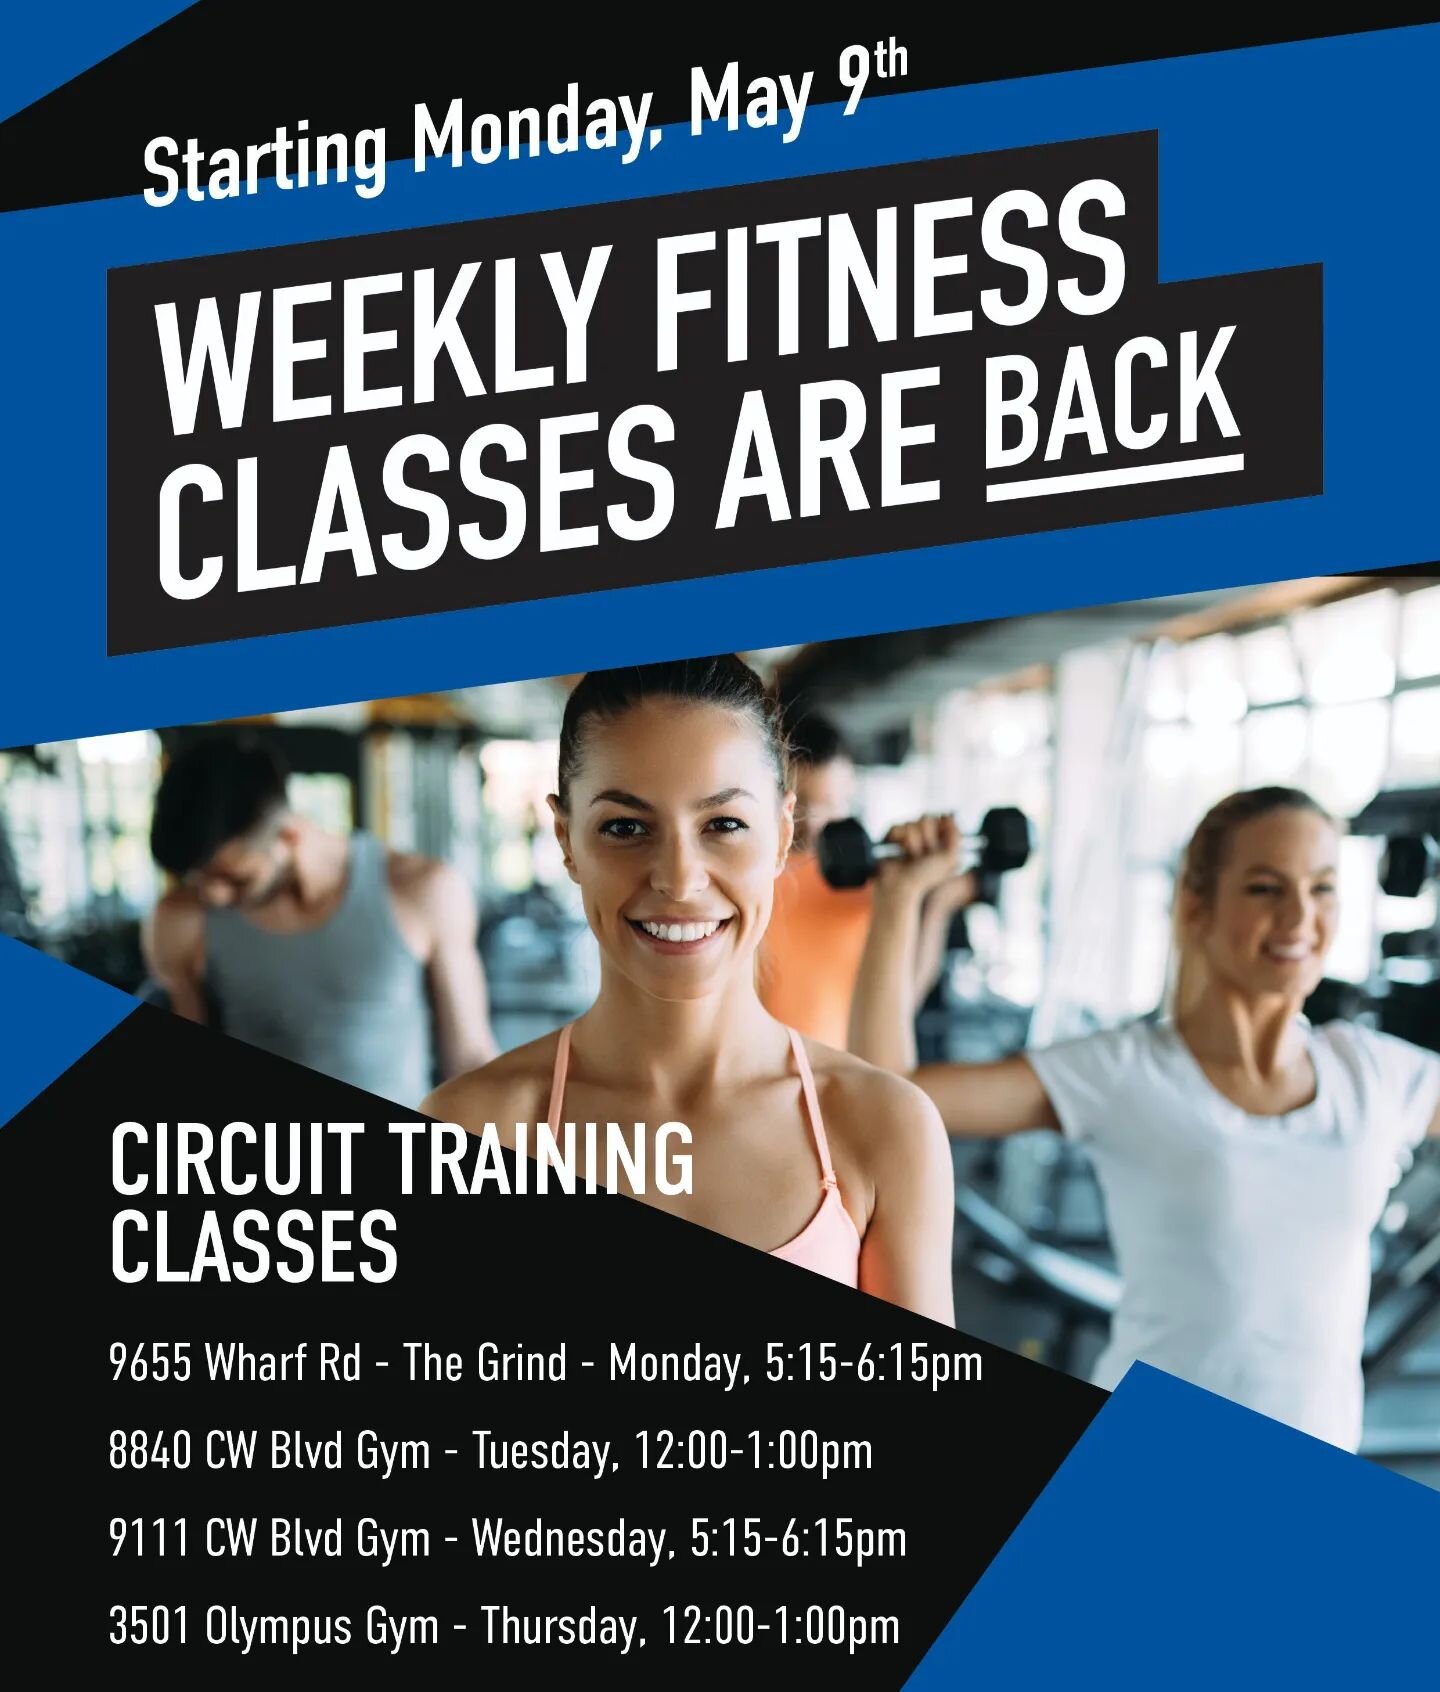 Weekly fitness classes are back at Cypress Waters starting today!  Residents and office tenants are welcome to join the free classes Monday - Thursday. See our website for the full schedule!  CypressWaters.com/fitness-classes